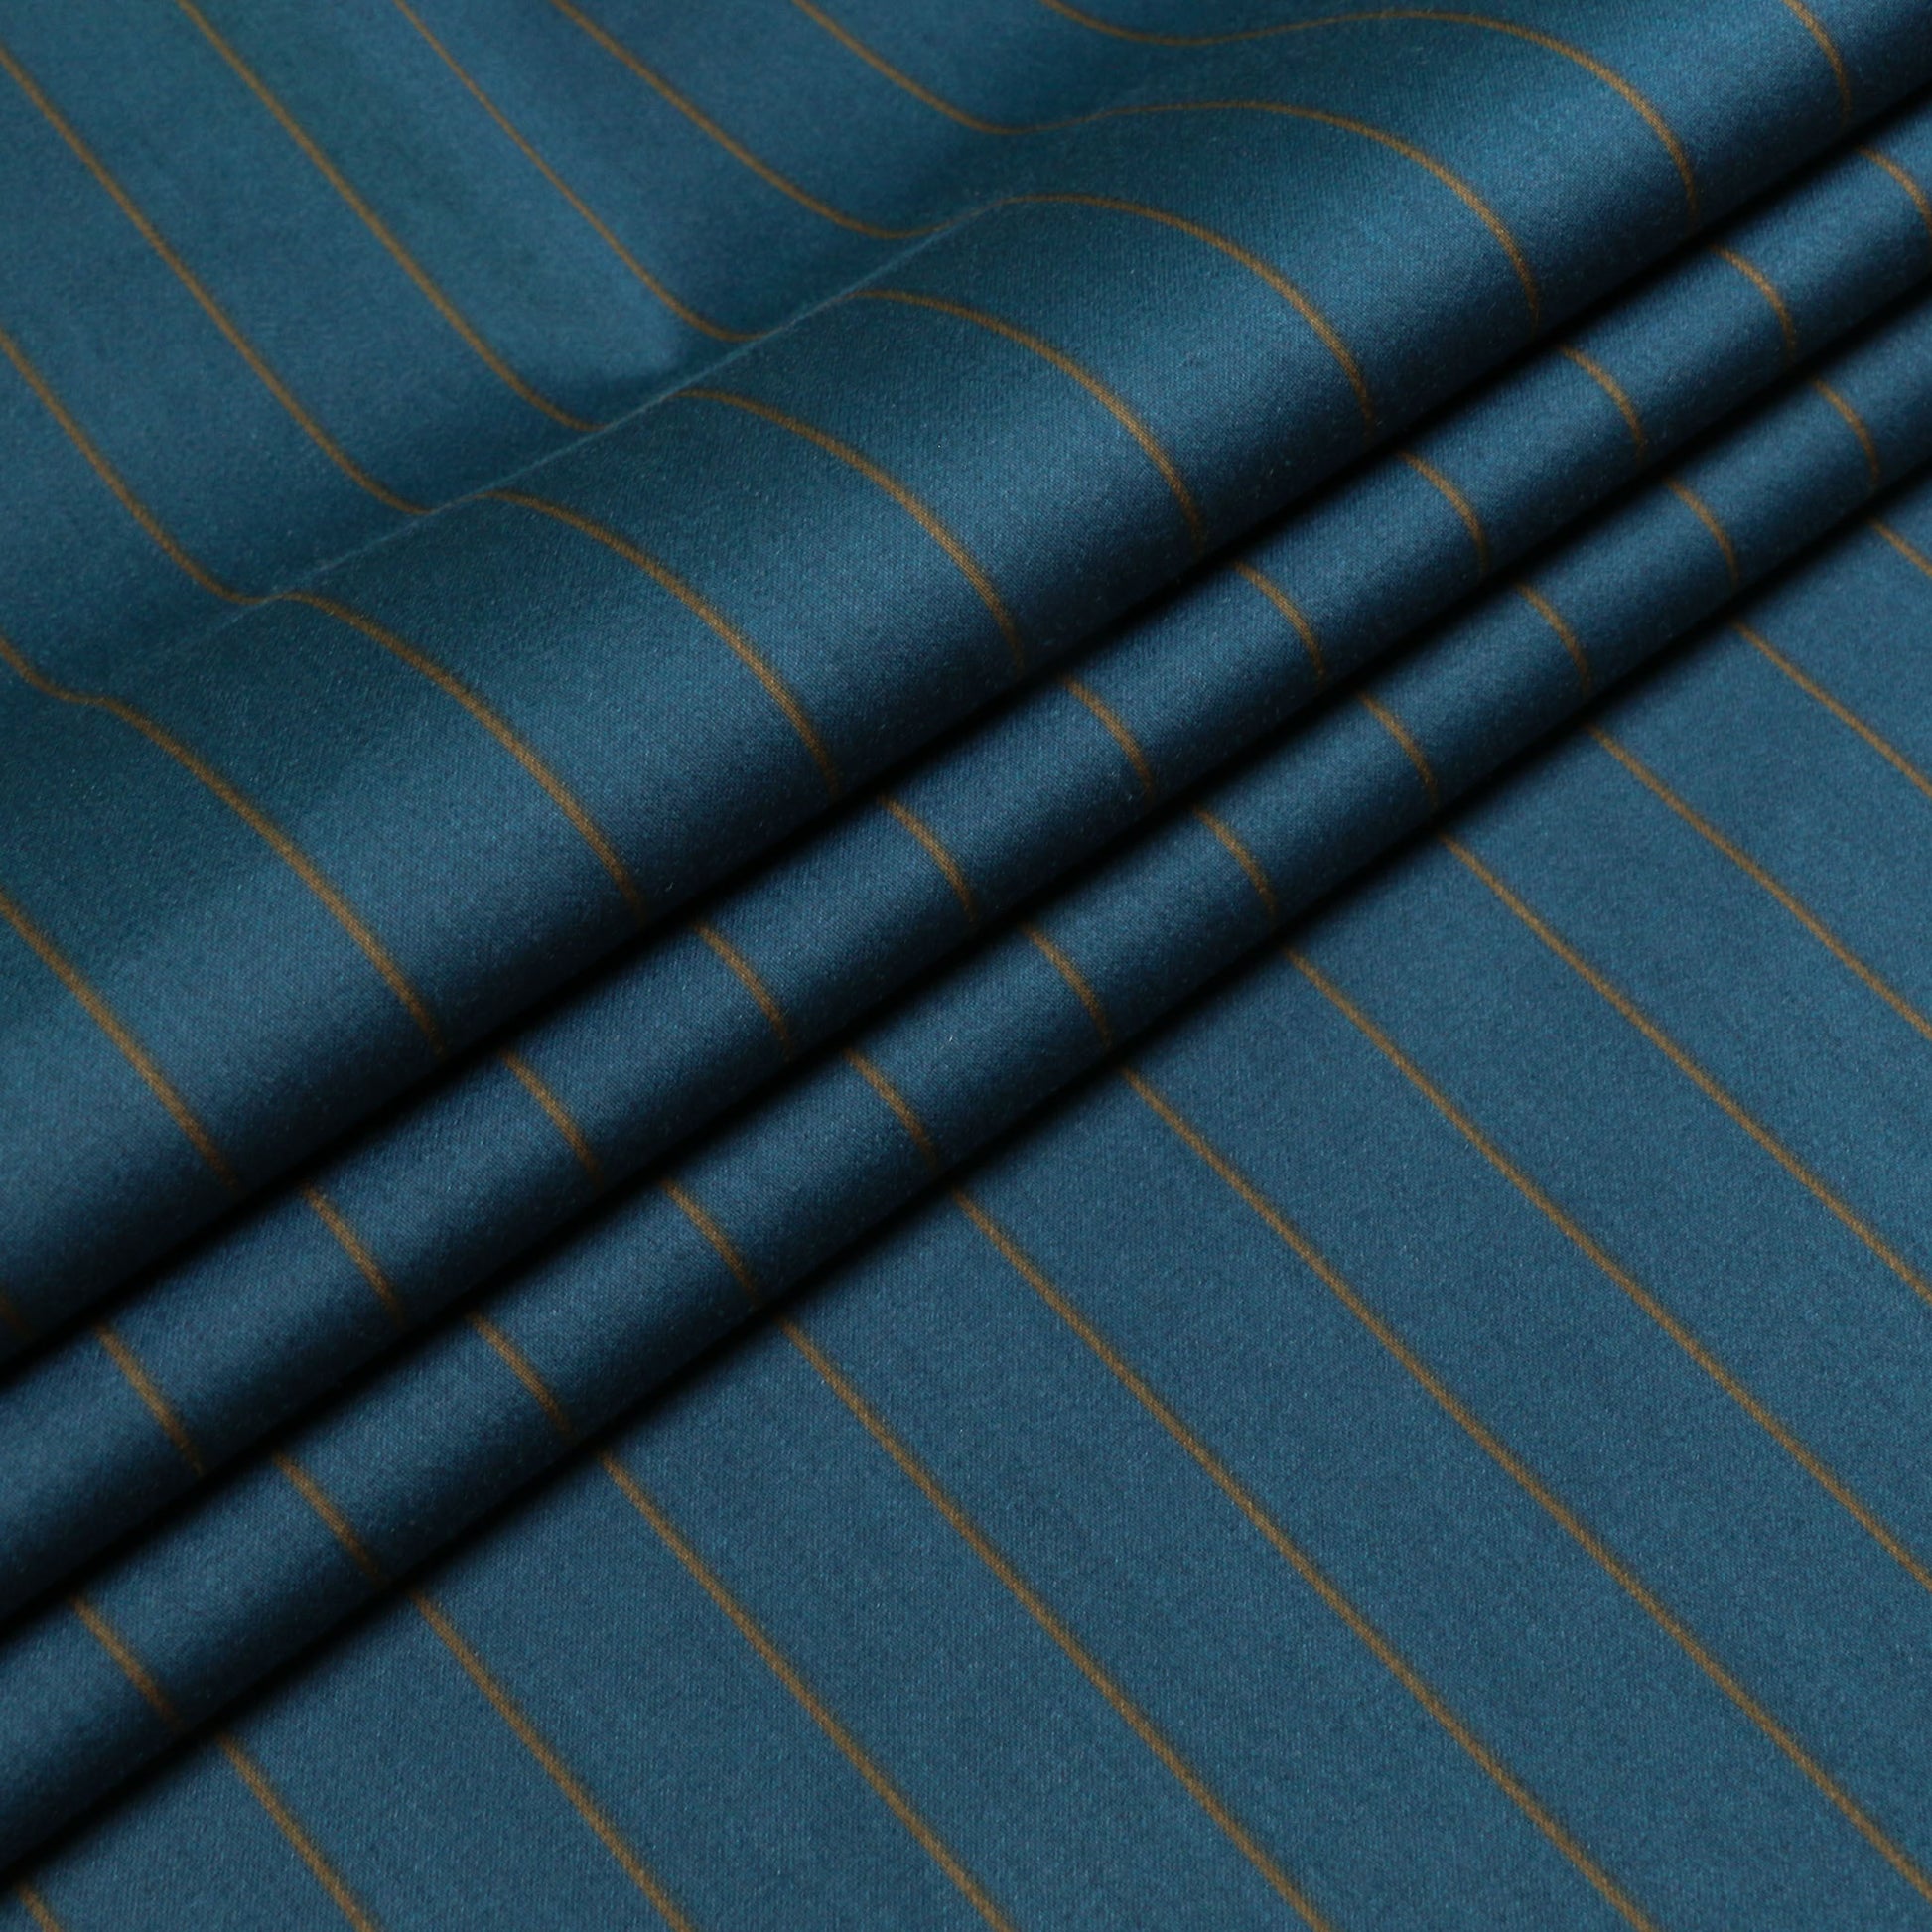 folded beige and teal cotton pinstripe dressmaking fabric